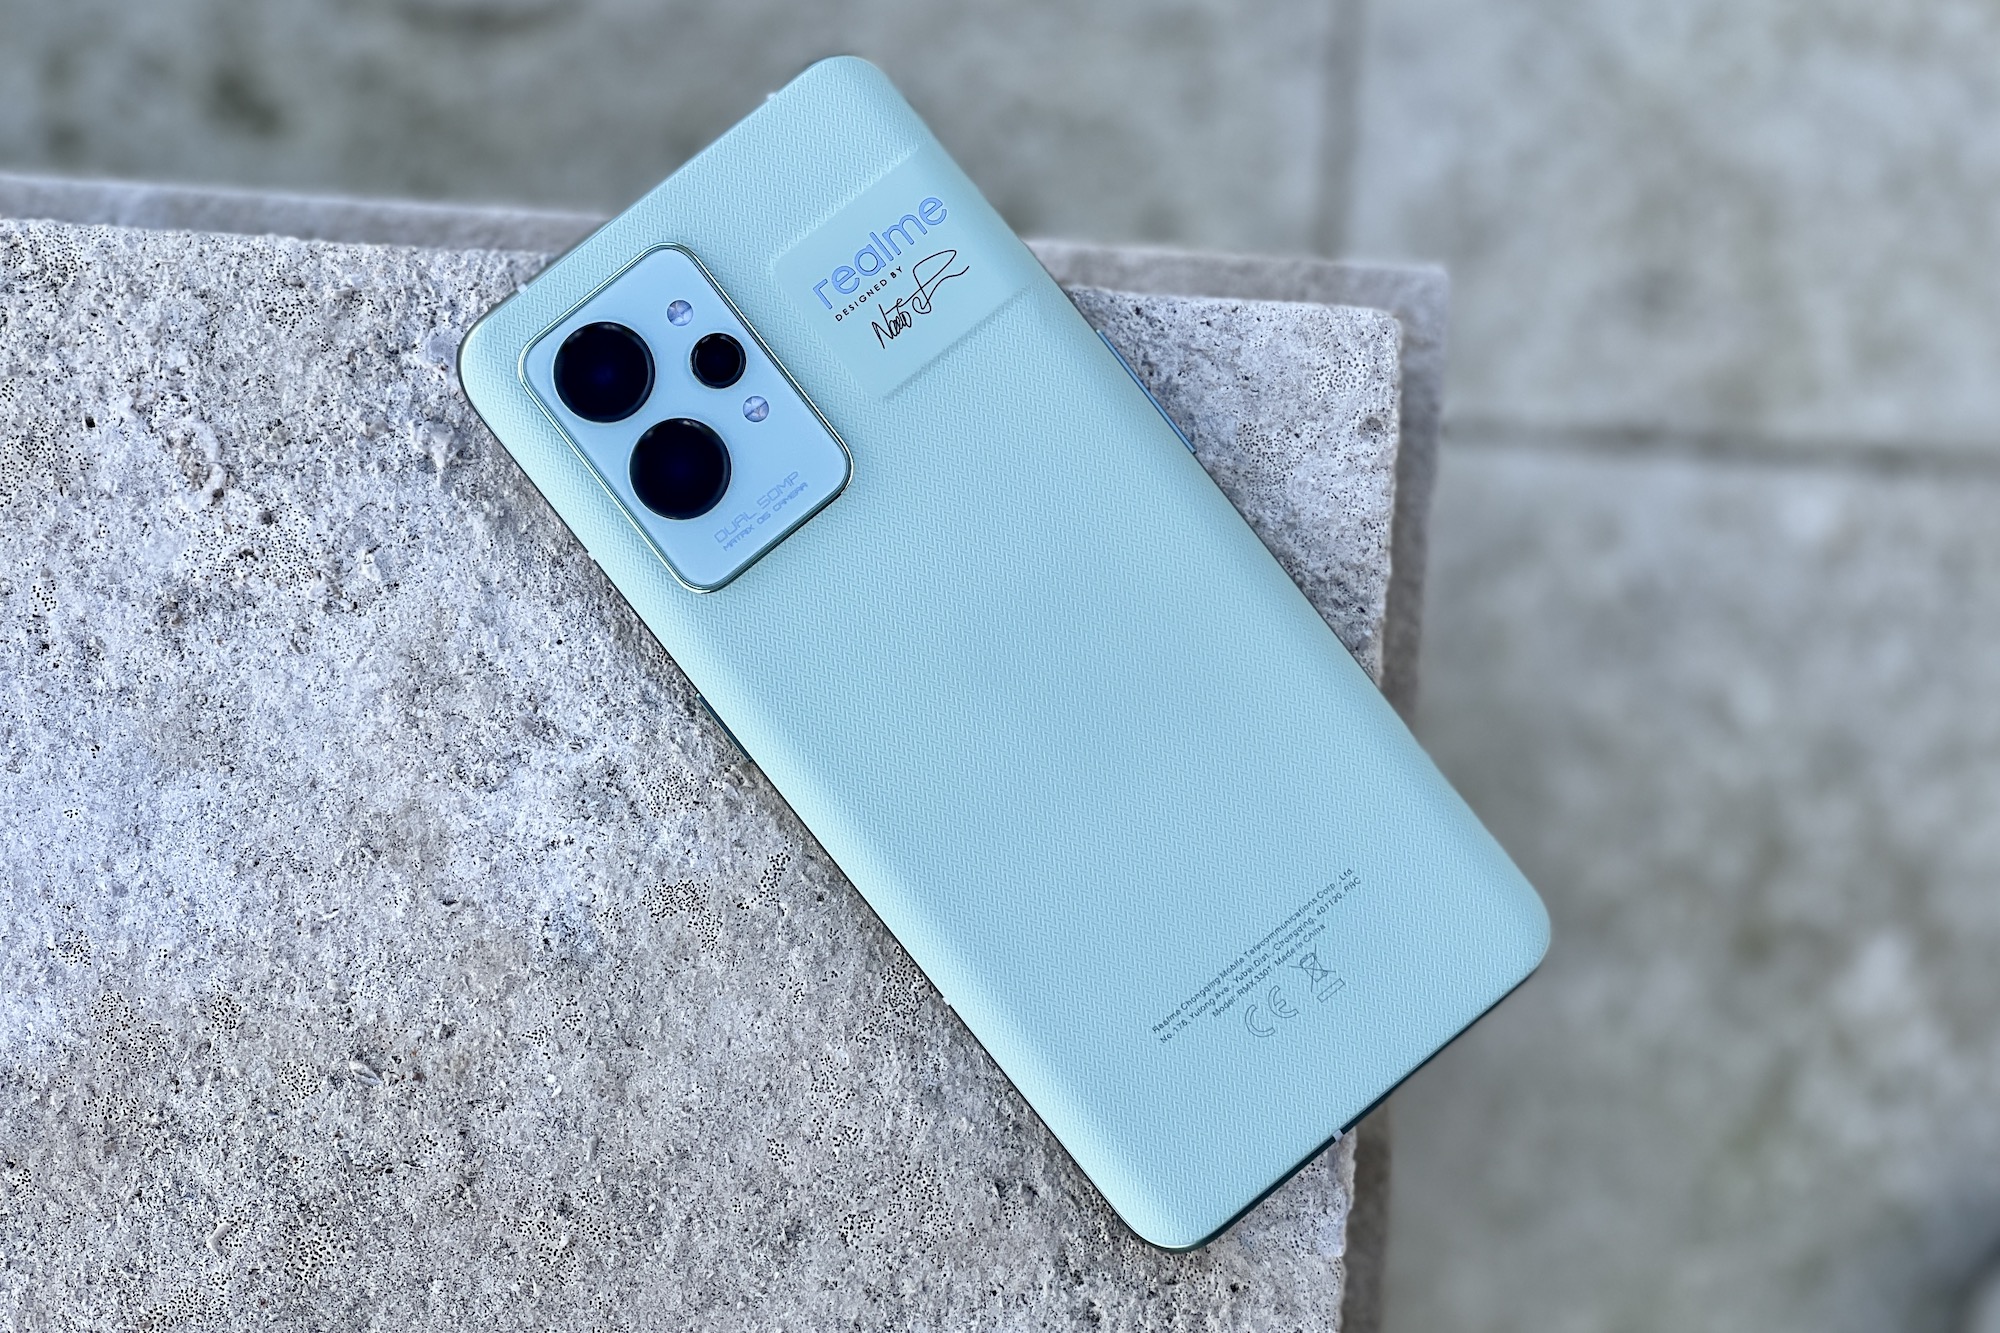 Realme GT 2 Pro: everything we know so far